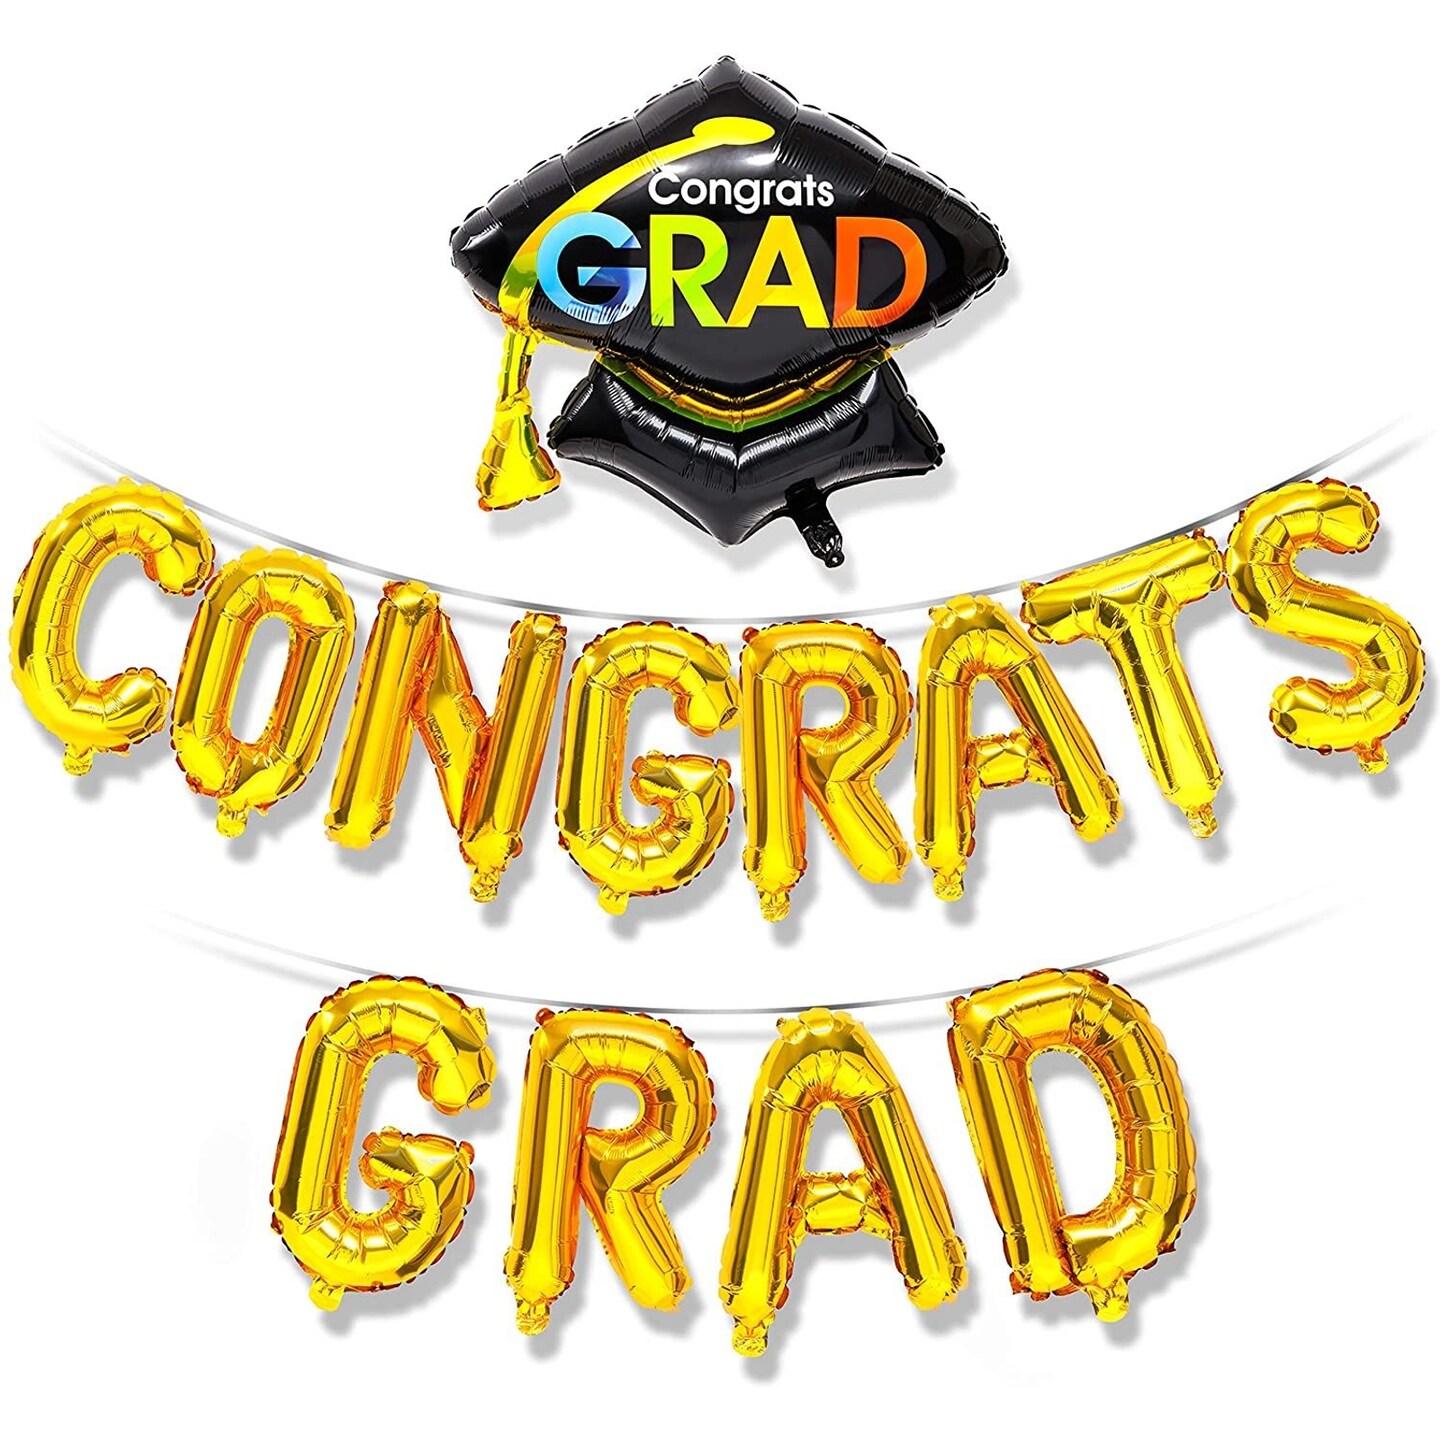 Congrats Grad Balloon Banner - Shiny Gold Balloons for Graduation Party Decorations, Class of 2024, 16 Inch